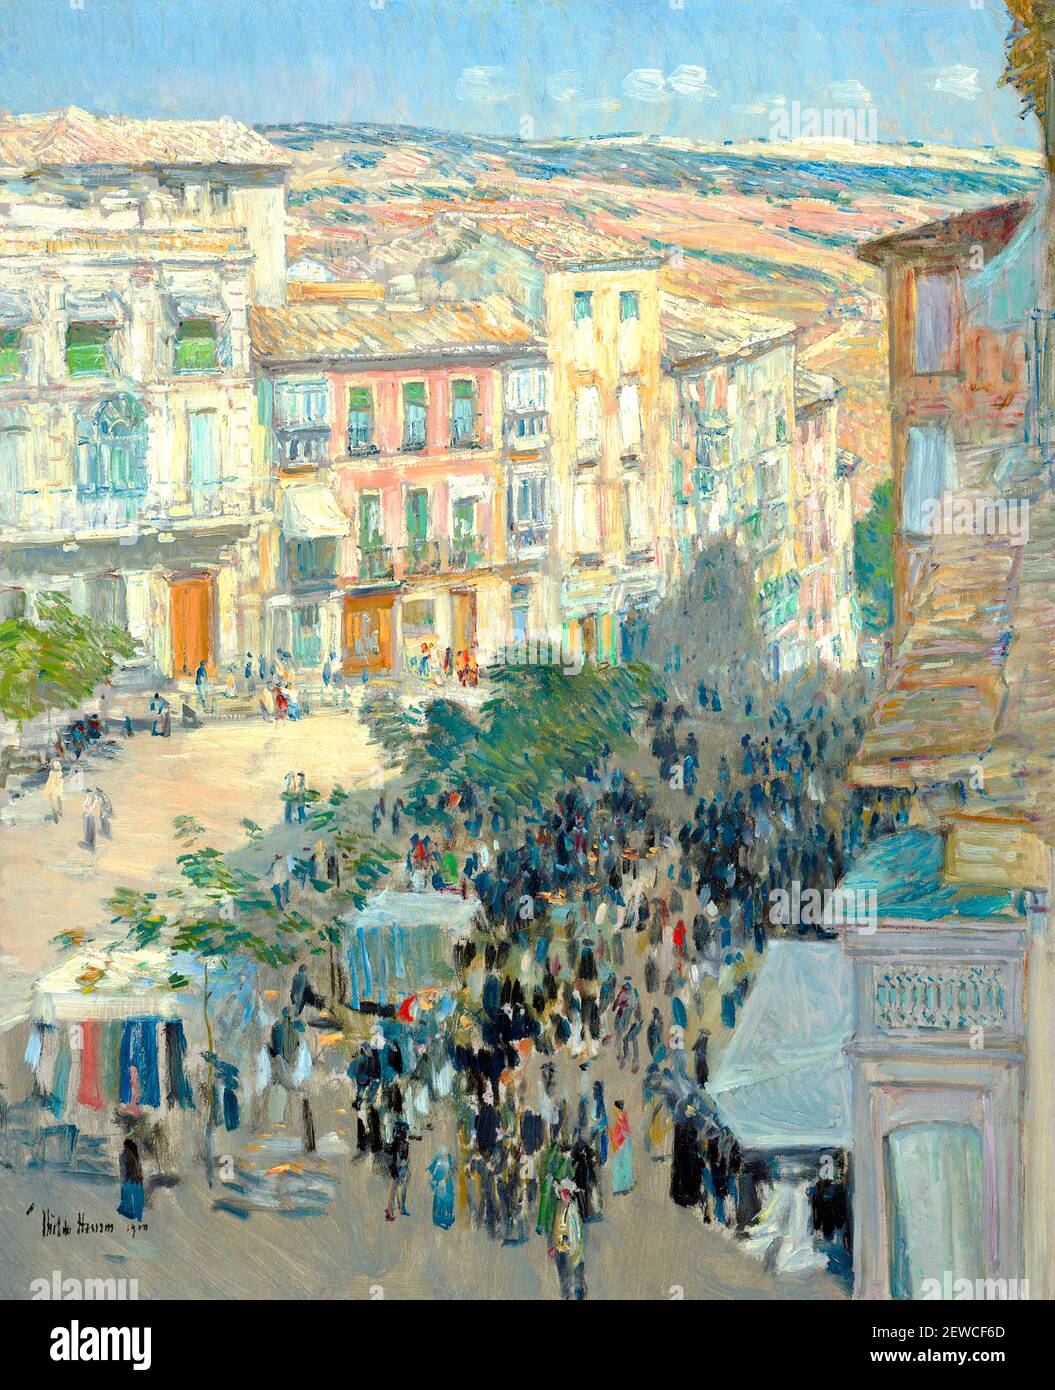 Childe Hassam View of a Southern French City Stock Photo